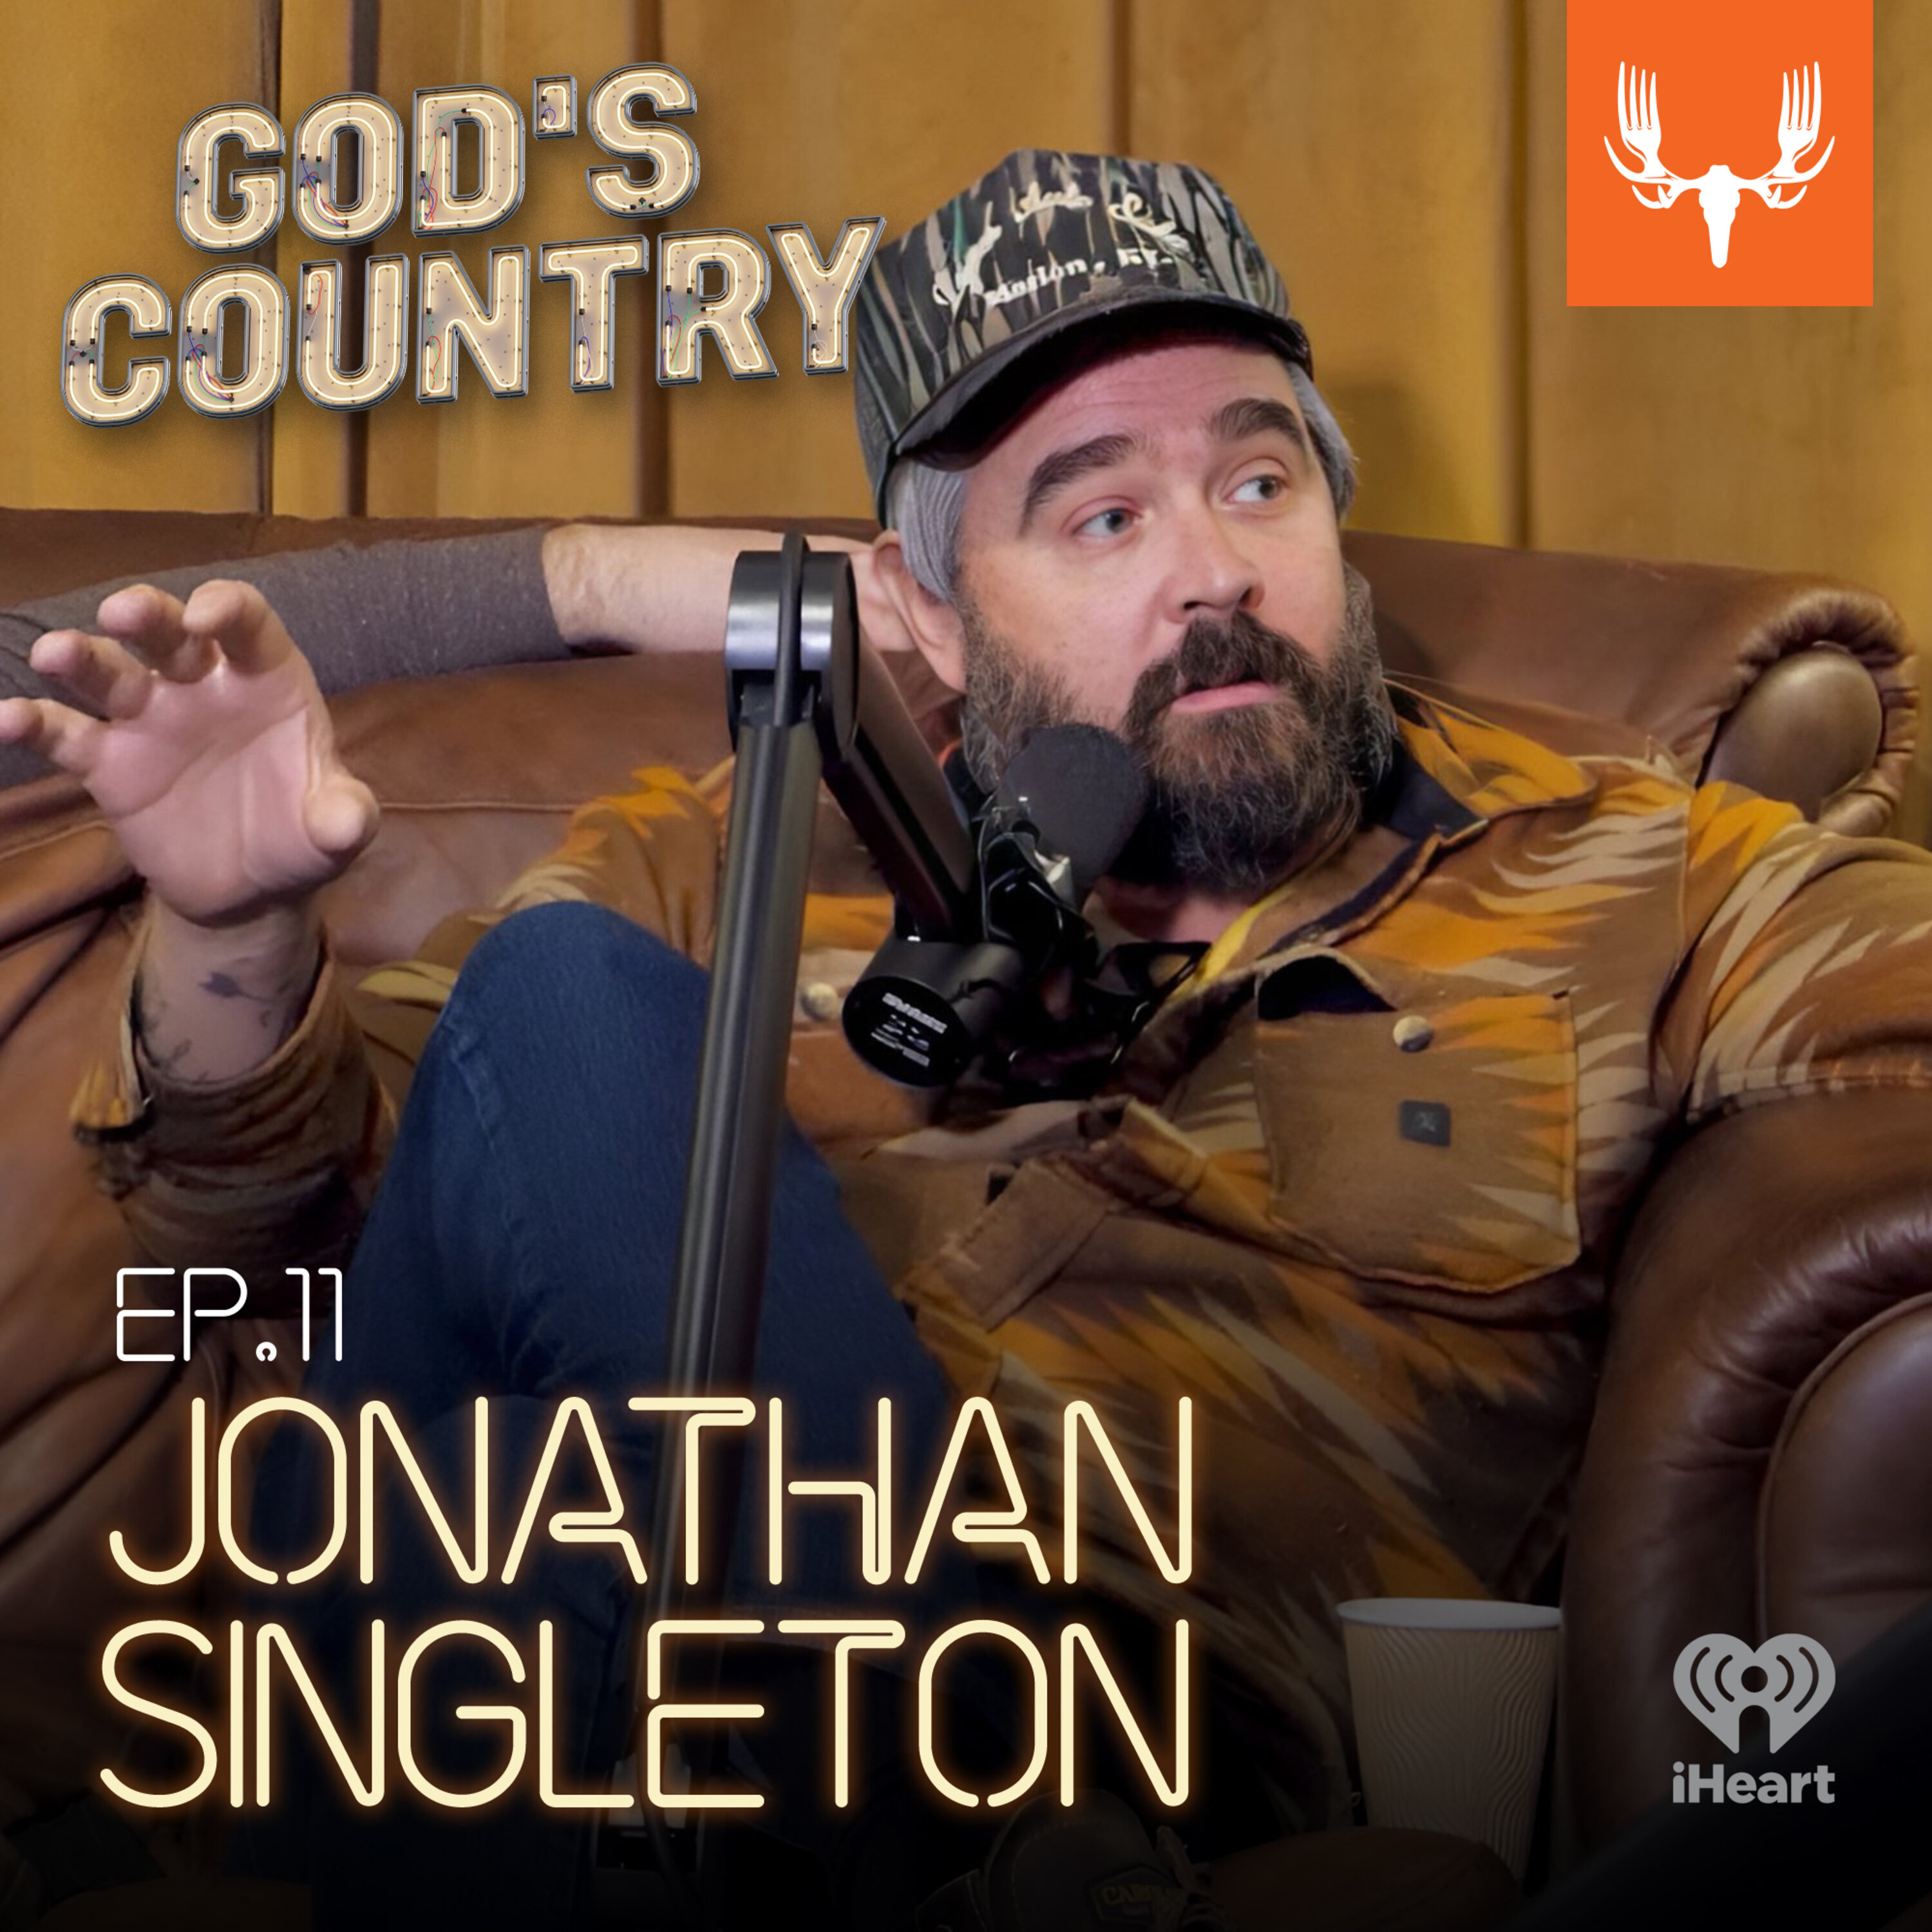 Ep. 11: Jonathan Singleton on Hunting with Your Dad and ”Watching Airplanes”